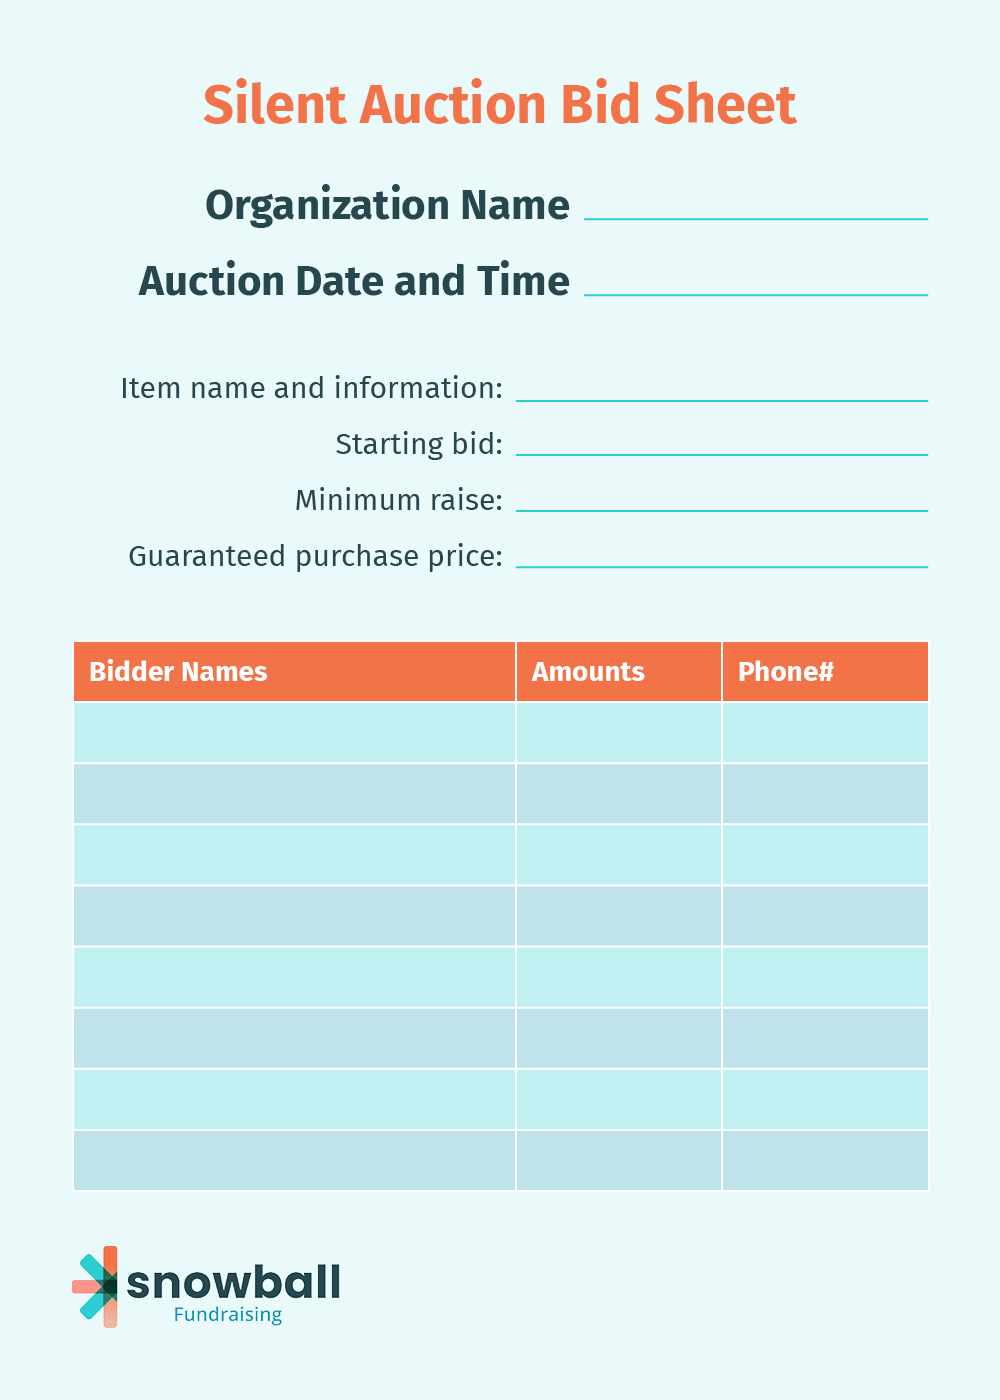 A silent auction bid sheet with labels for each field.